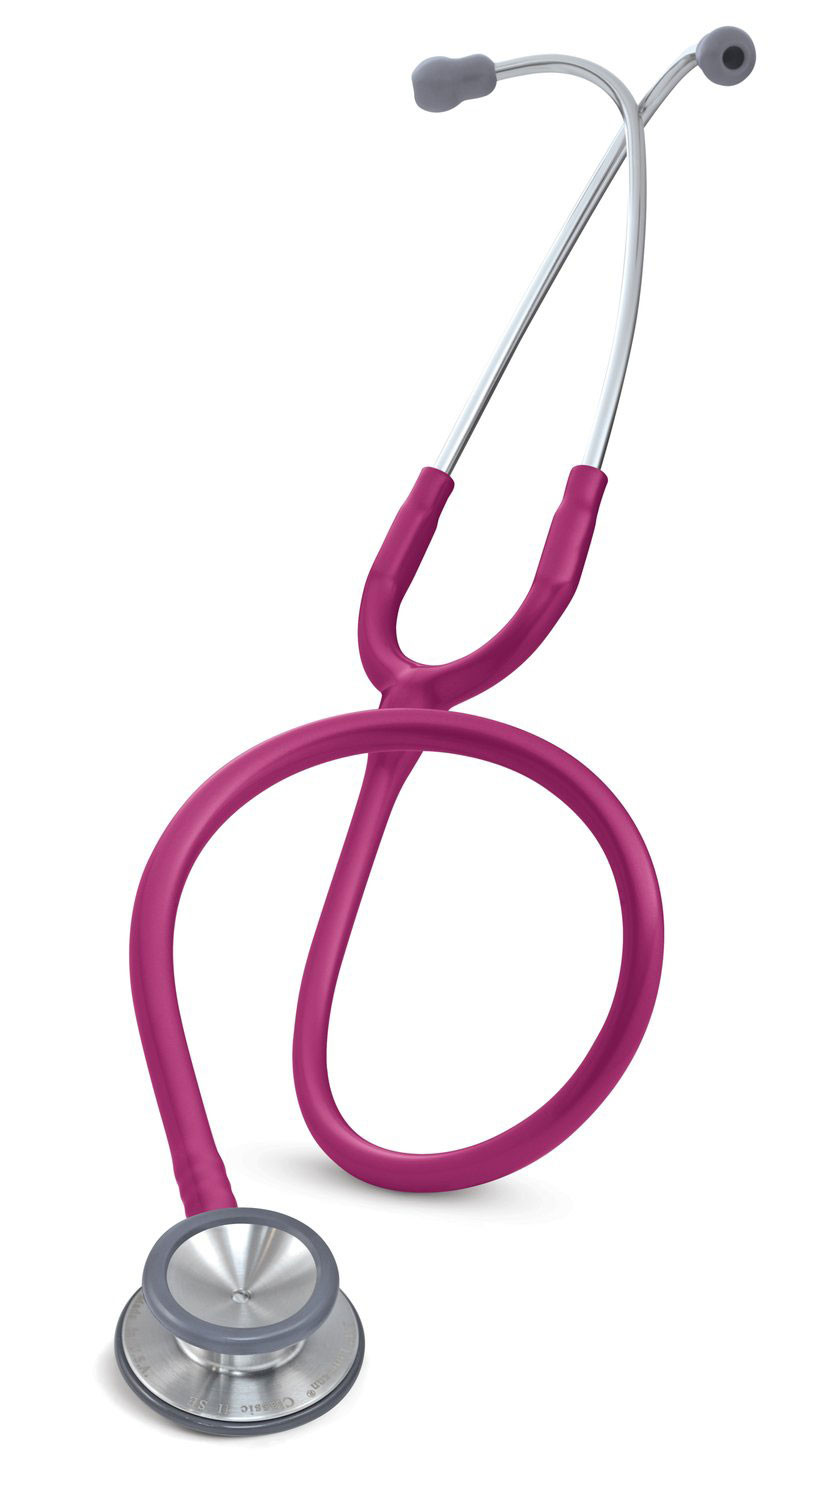 Purple stethoscope clipart the cliparts